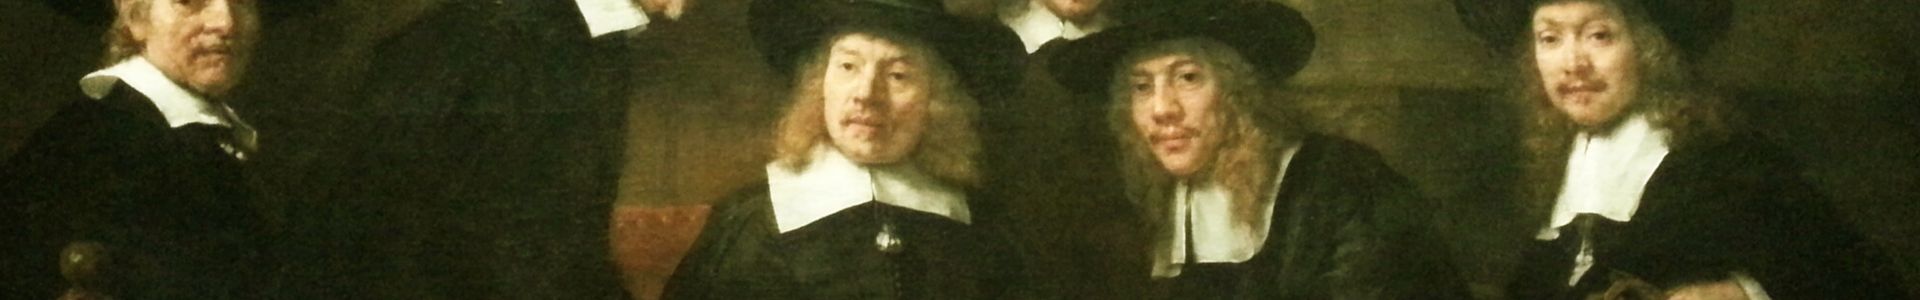 the-syndics-of-the-amsterdam-drapers-guild-rembrandt-jpg.jpg